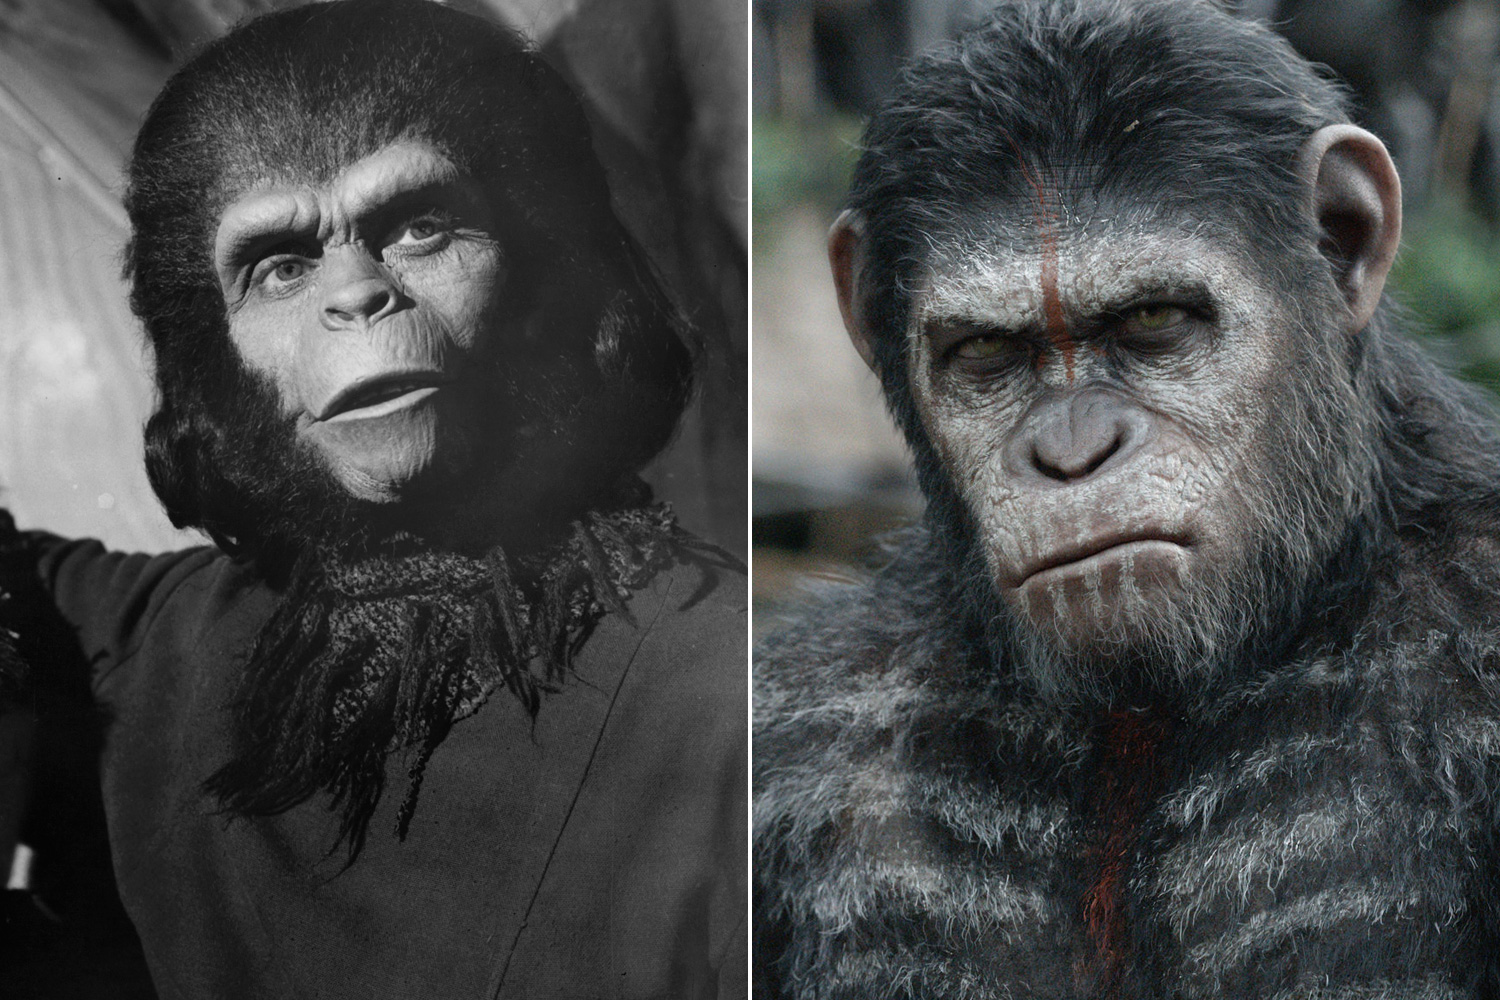 The original Planet of the Apes premiered in 1968 and starred Charlton Heston as astronaut George Taylor. Rise of the Planet of the Apes rebooted the franchise in 2011, with the second movie in the reboot, Dawn of the Planet of the Apes, out on July 11.